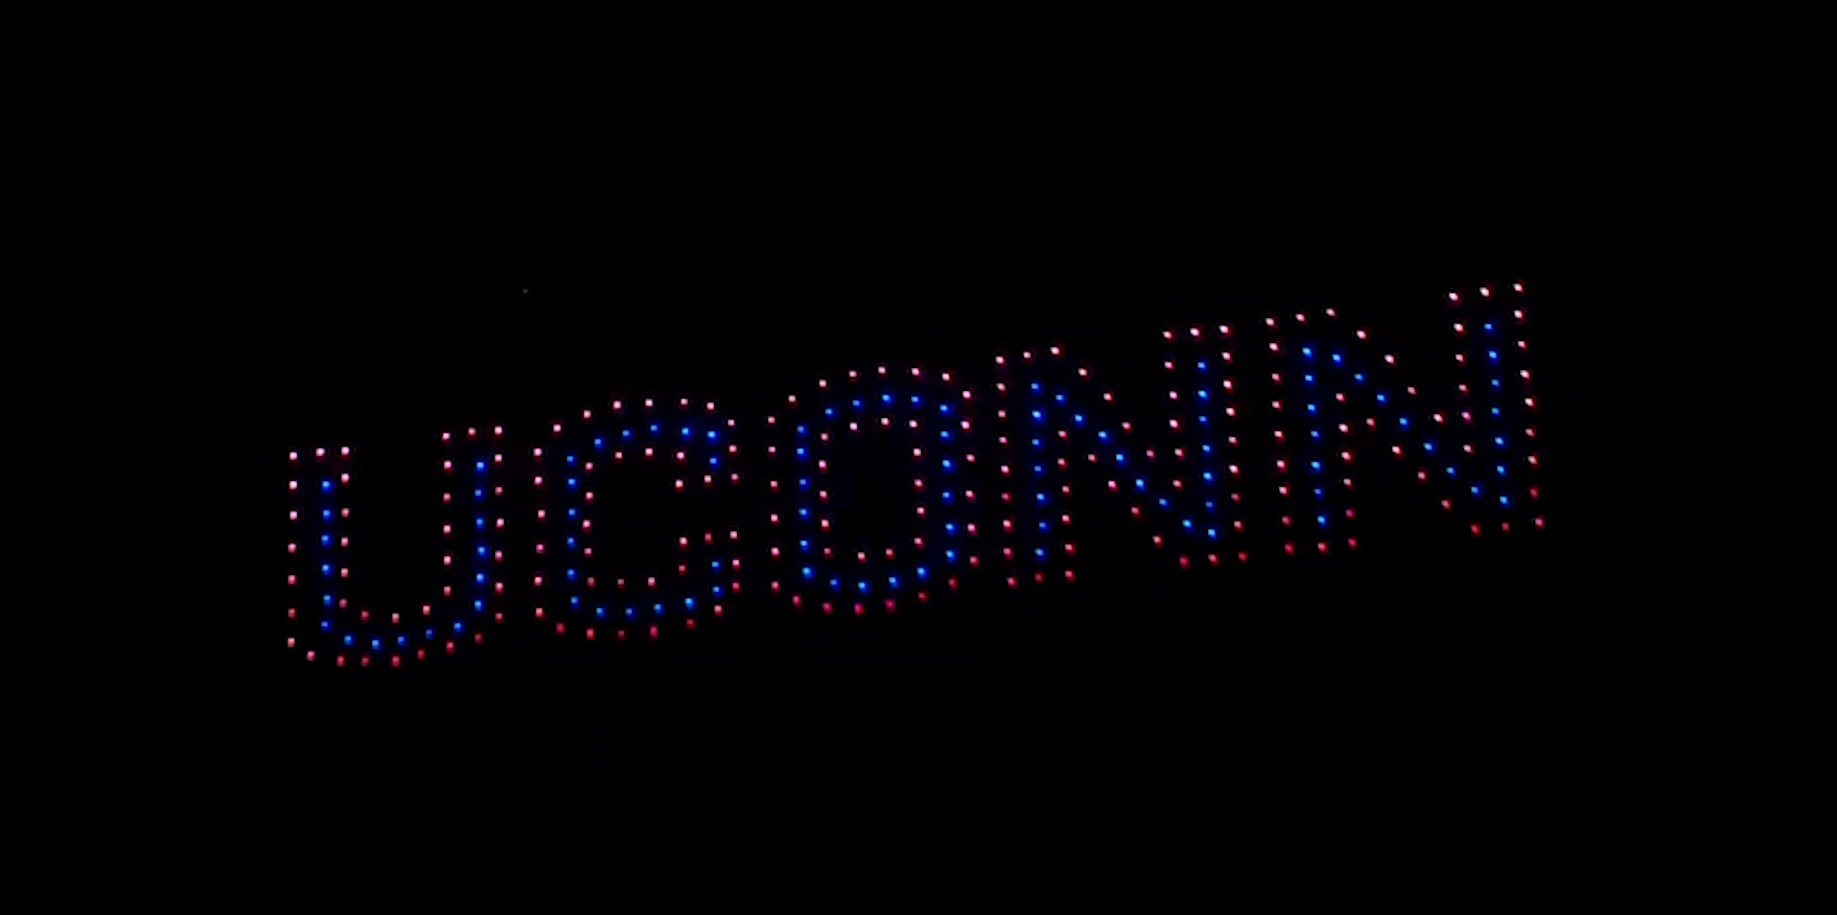 UCONN Logo in Drone Show